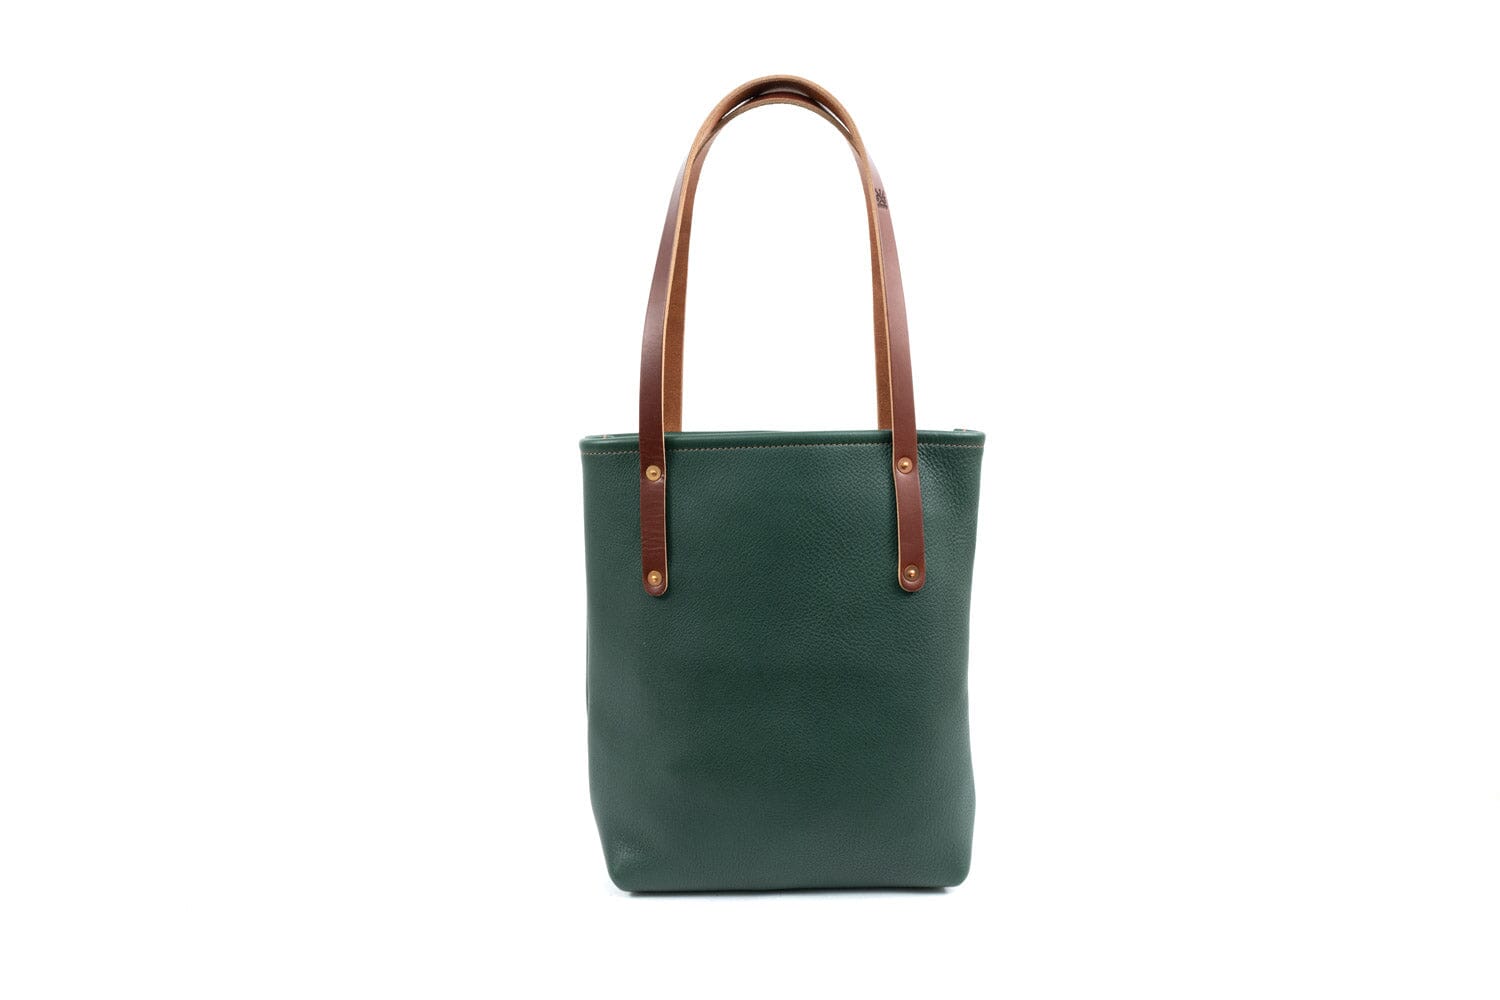 AVERY LEATHER TOTE BAG - SLIM MEDIUM FOREST GREEN (READY TO SHIP)